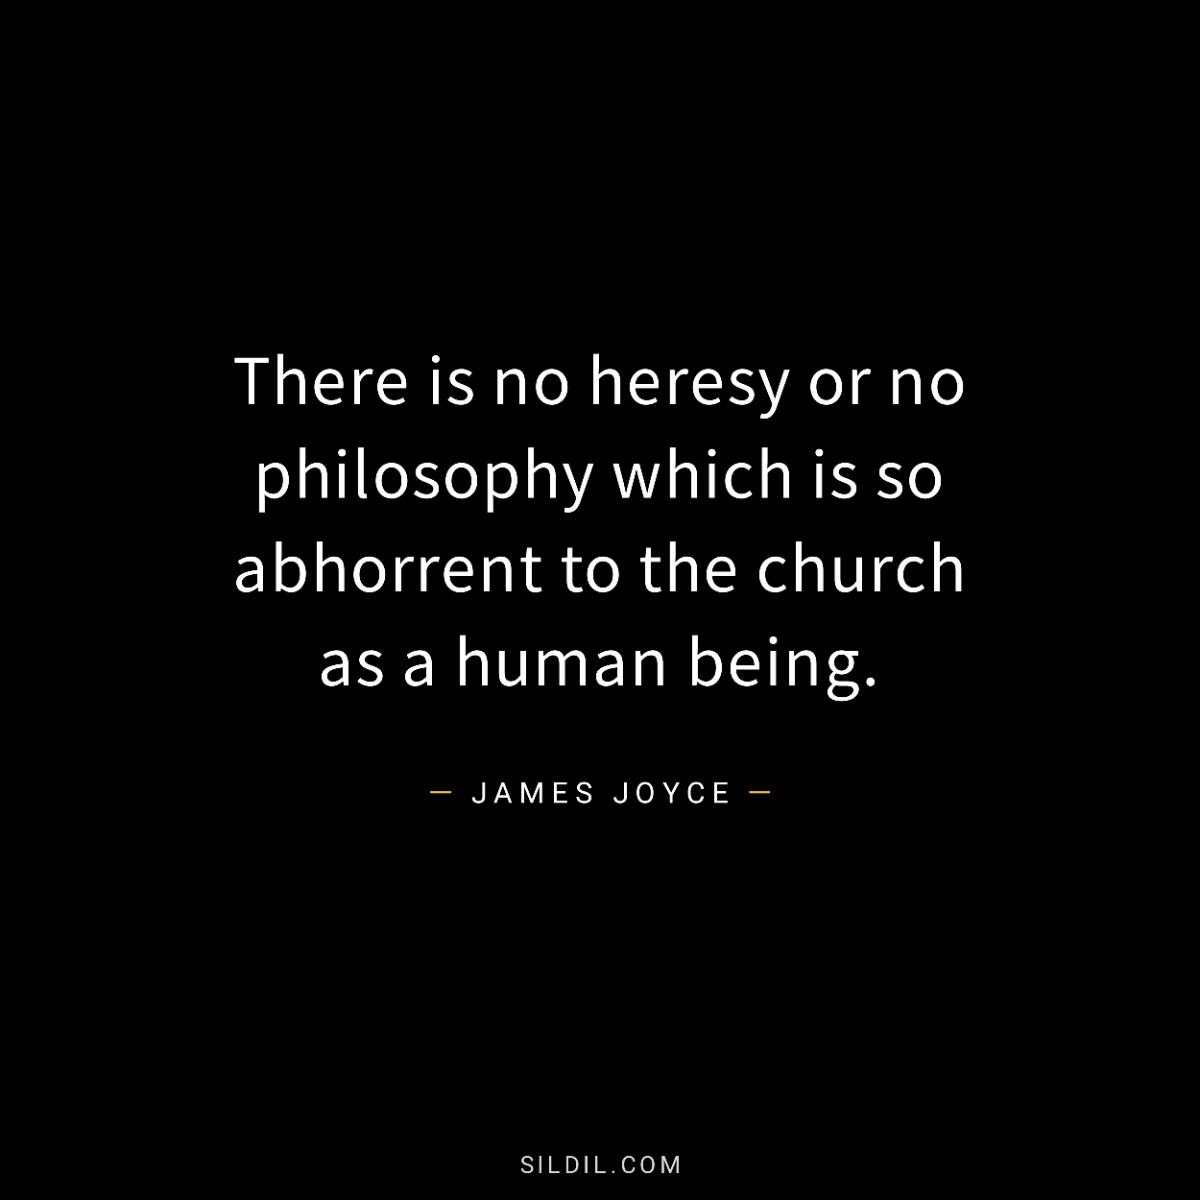 There is no heresy or no philosophy which is so abhorrent to the church as a human being.